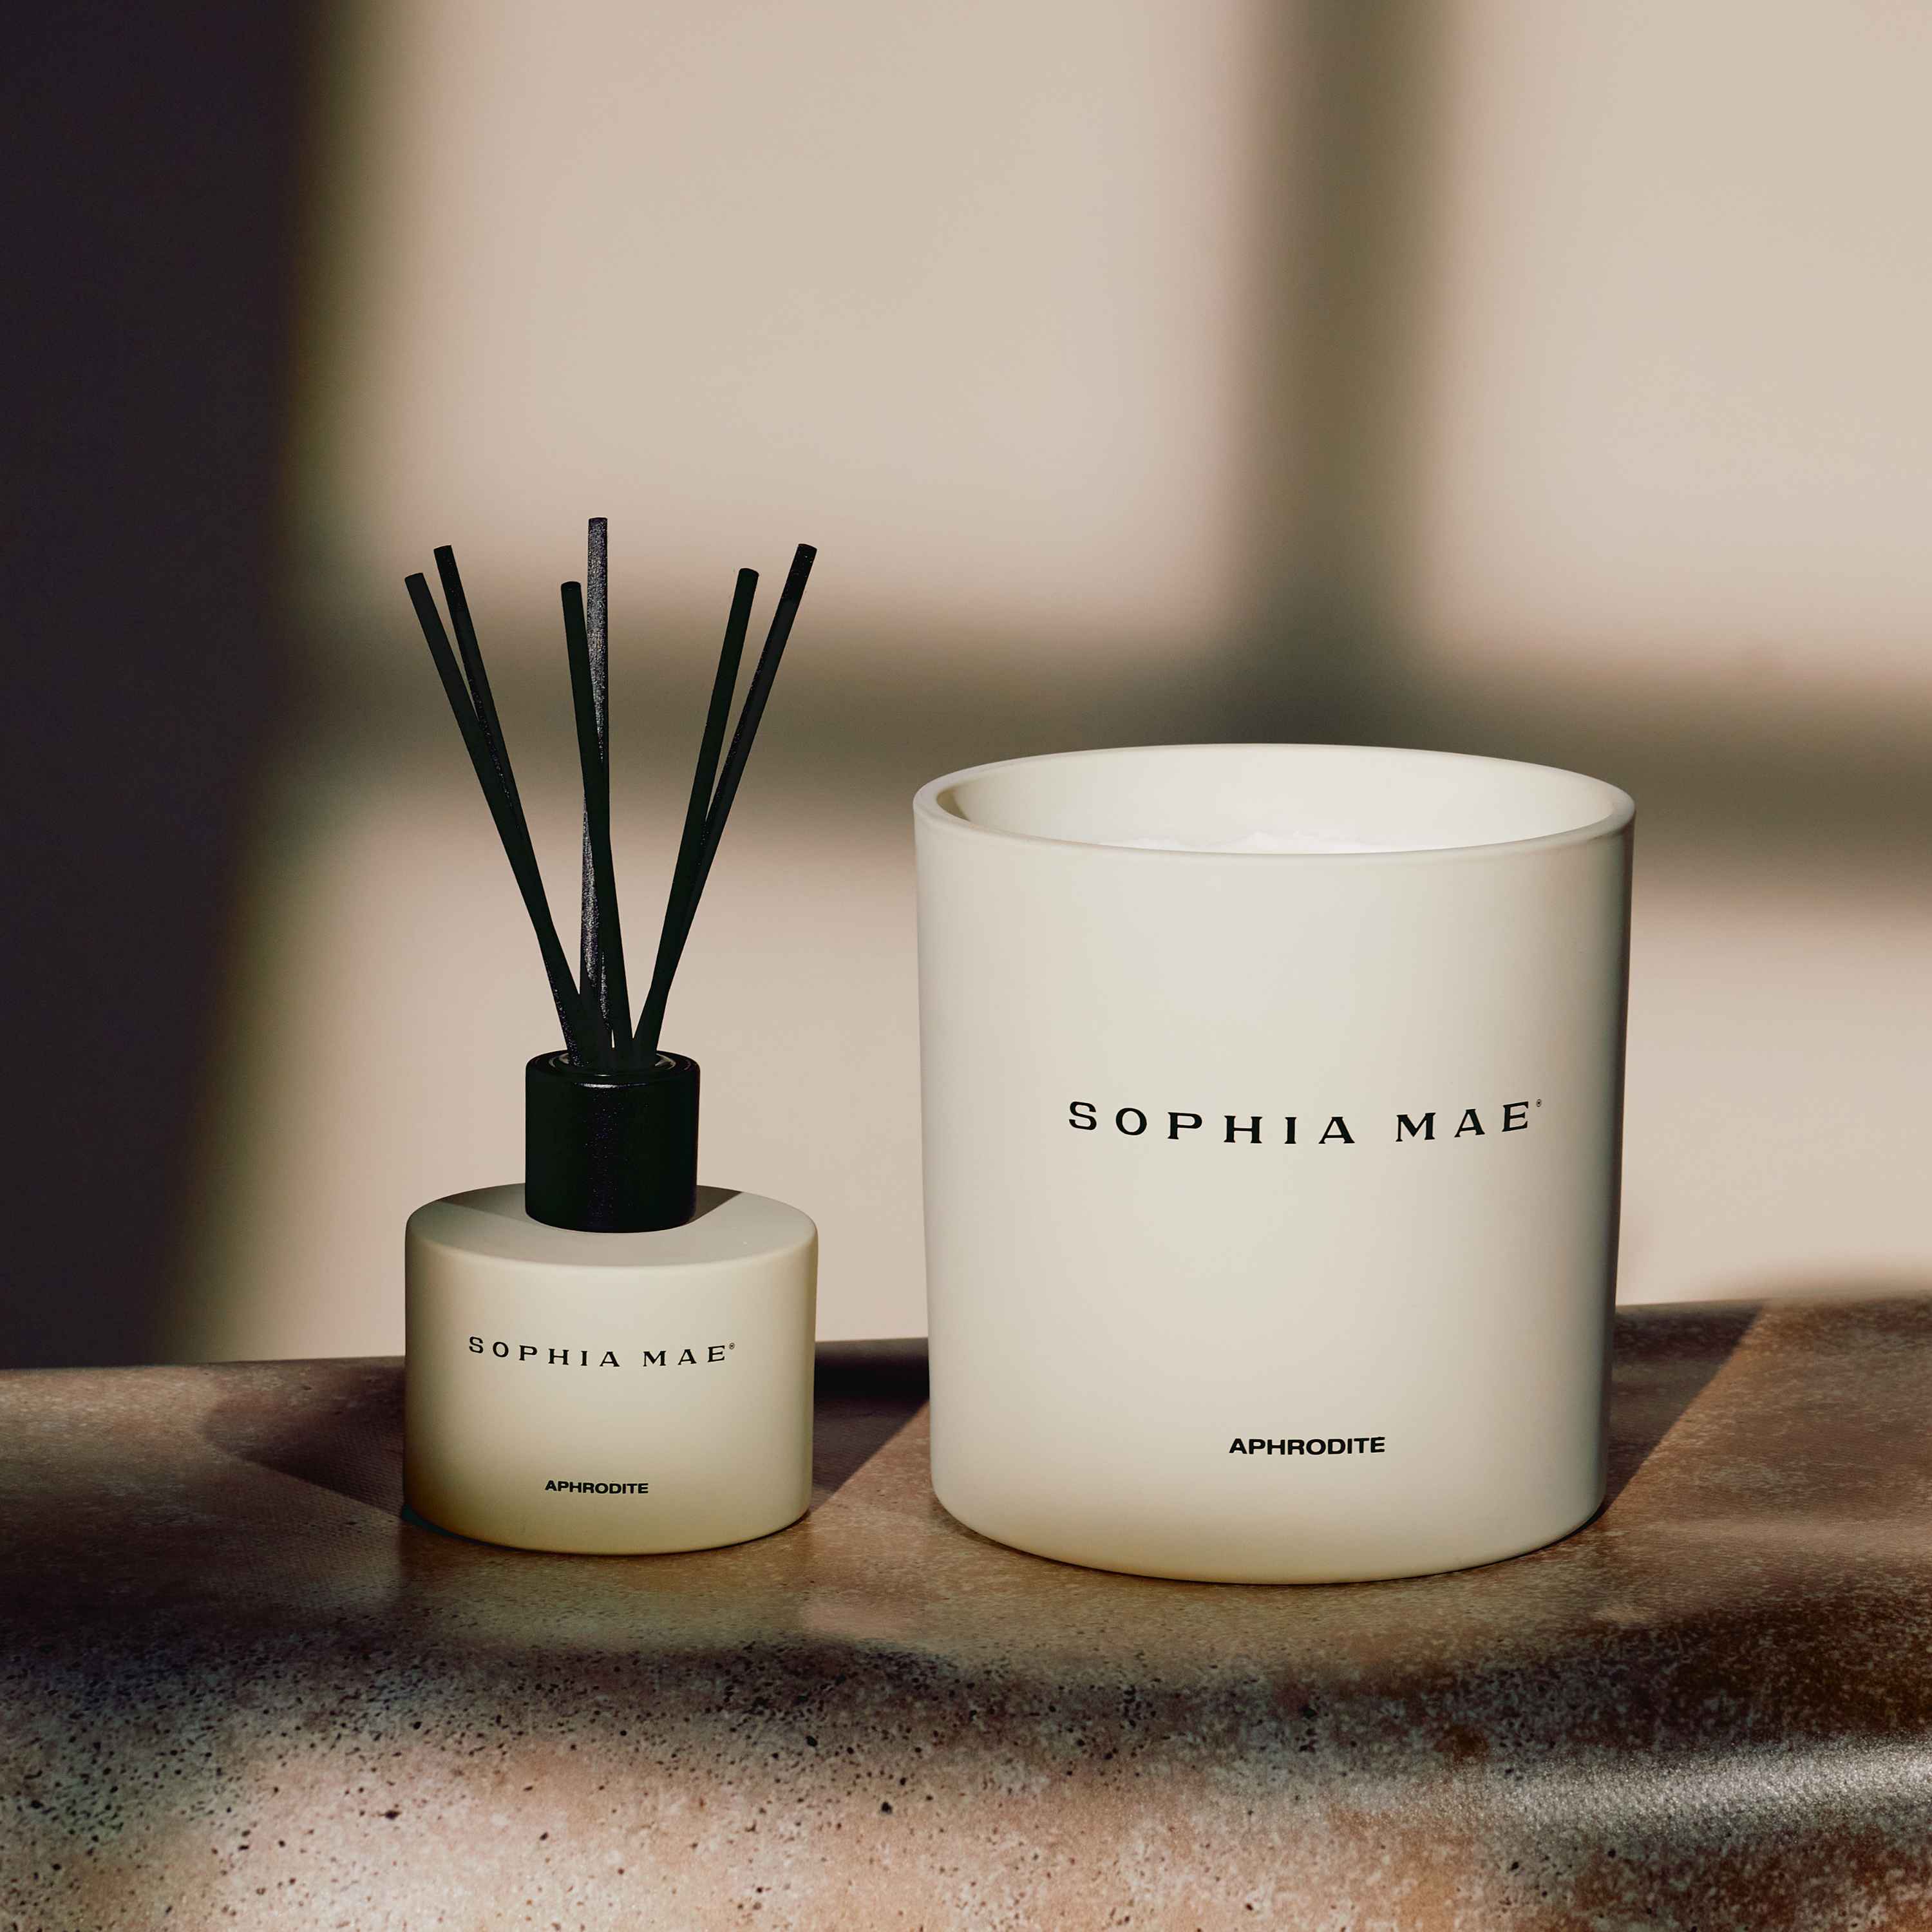 MAXI SCENTED CANDLE APHRODITE | SOPHIA MAE by Monica Geuze